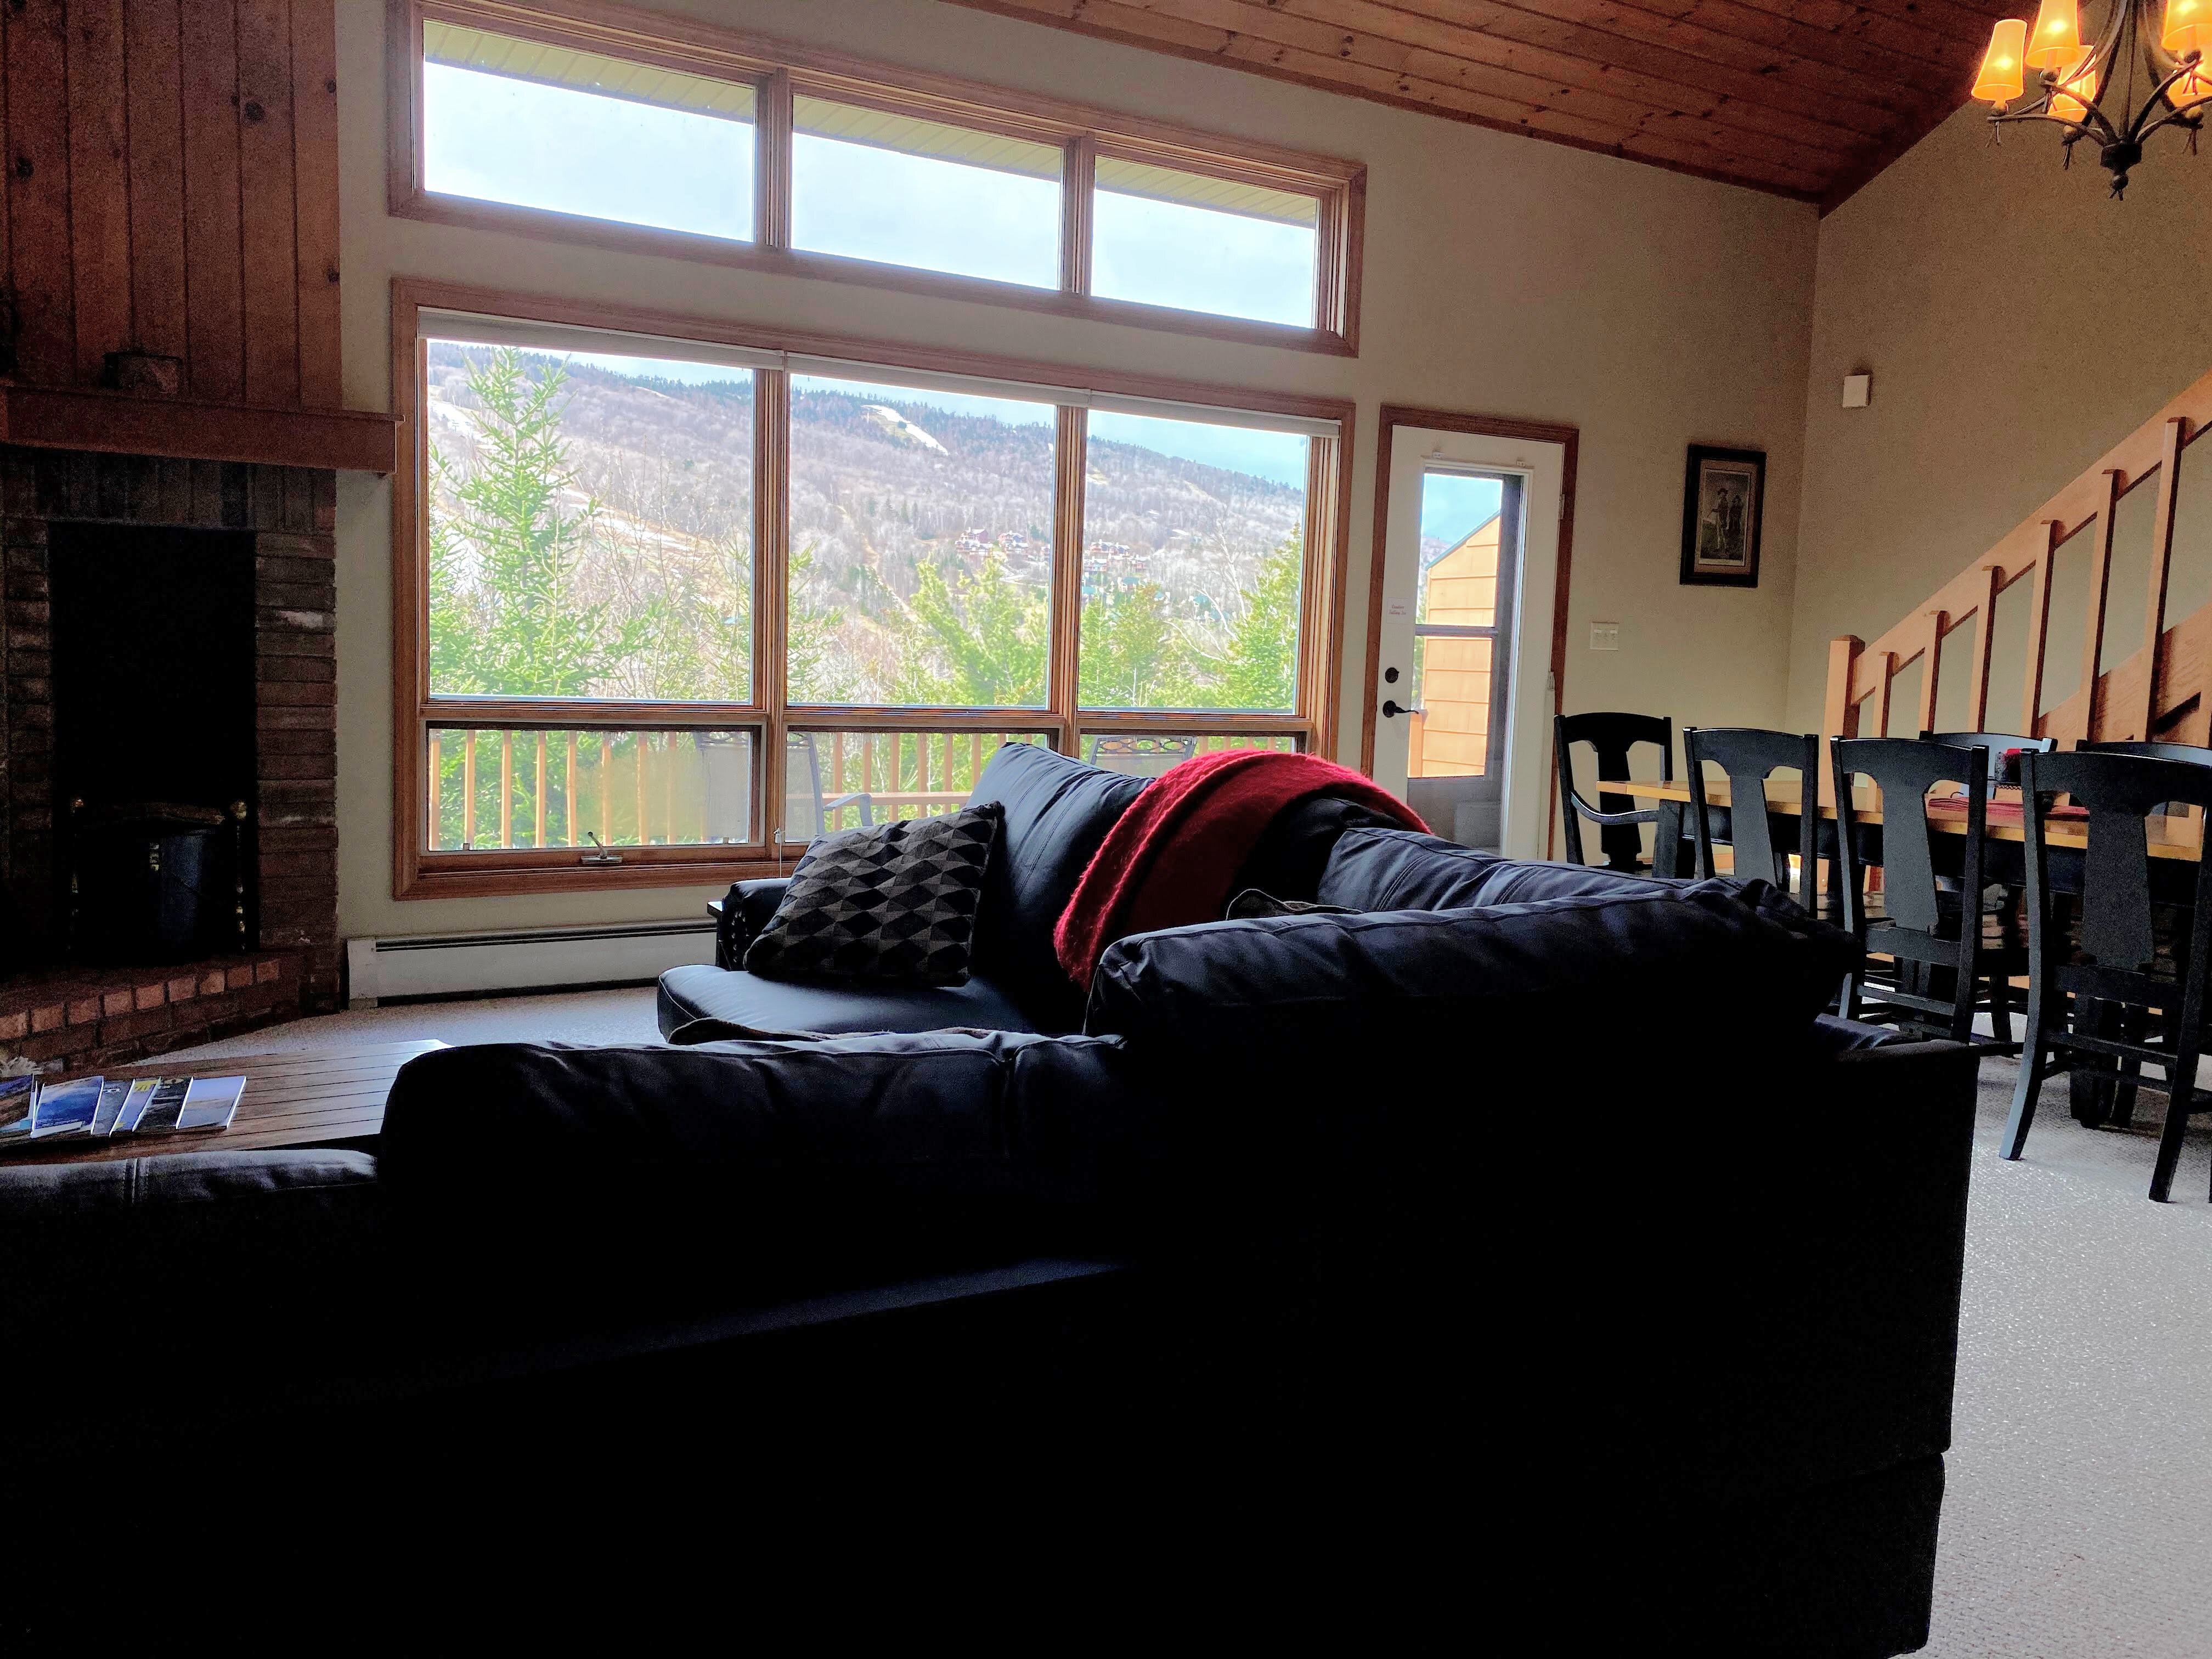 Views of the Bretton Woods ski slopes from every window and access to the back deck for additional outdoor dining.